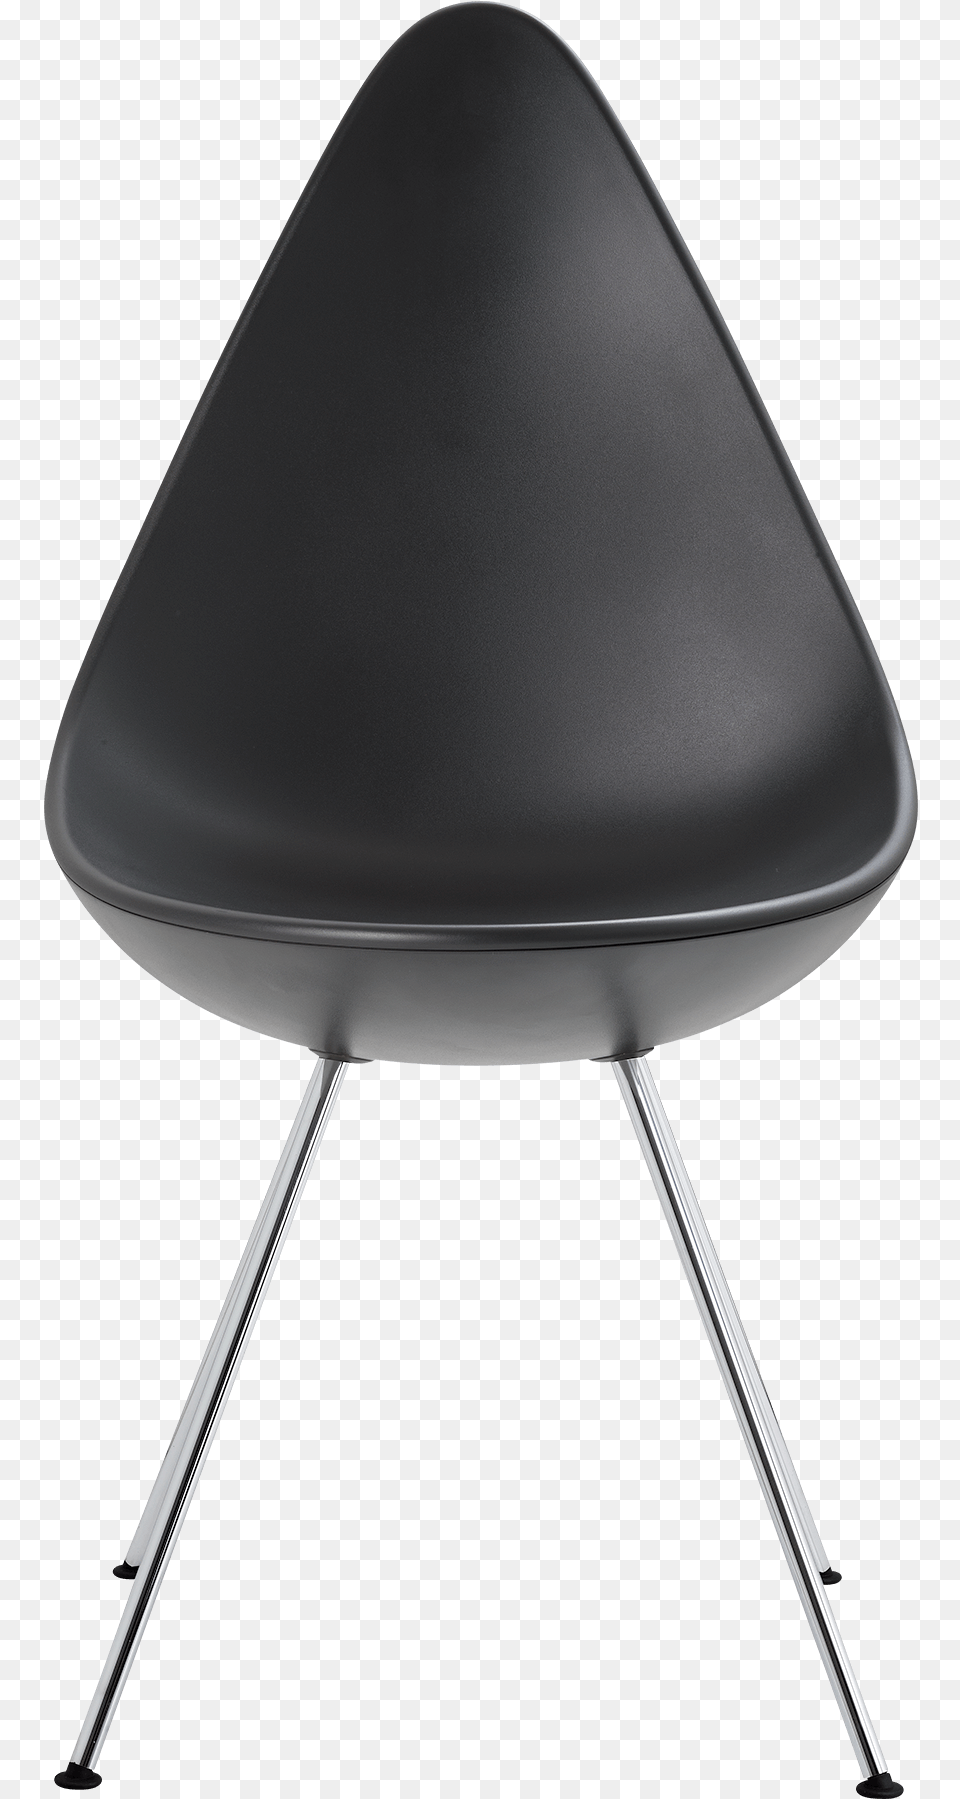 Chair Plastic Shell Arne Jacobsen Drop Chair, Cushion, Home Decor, Furniture Png Image